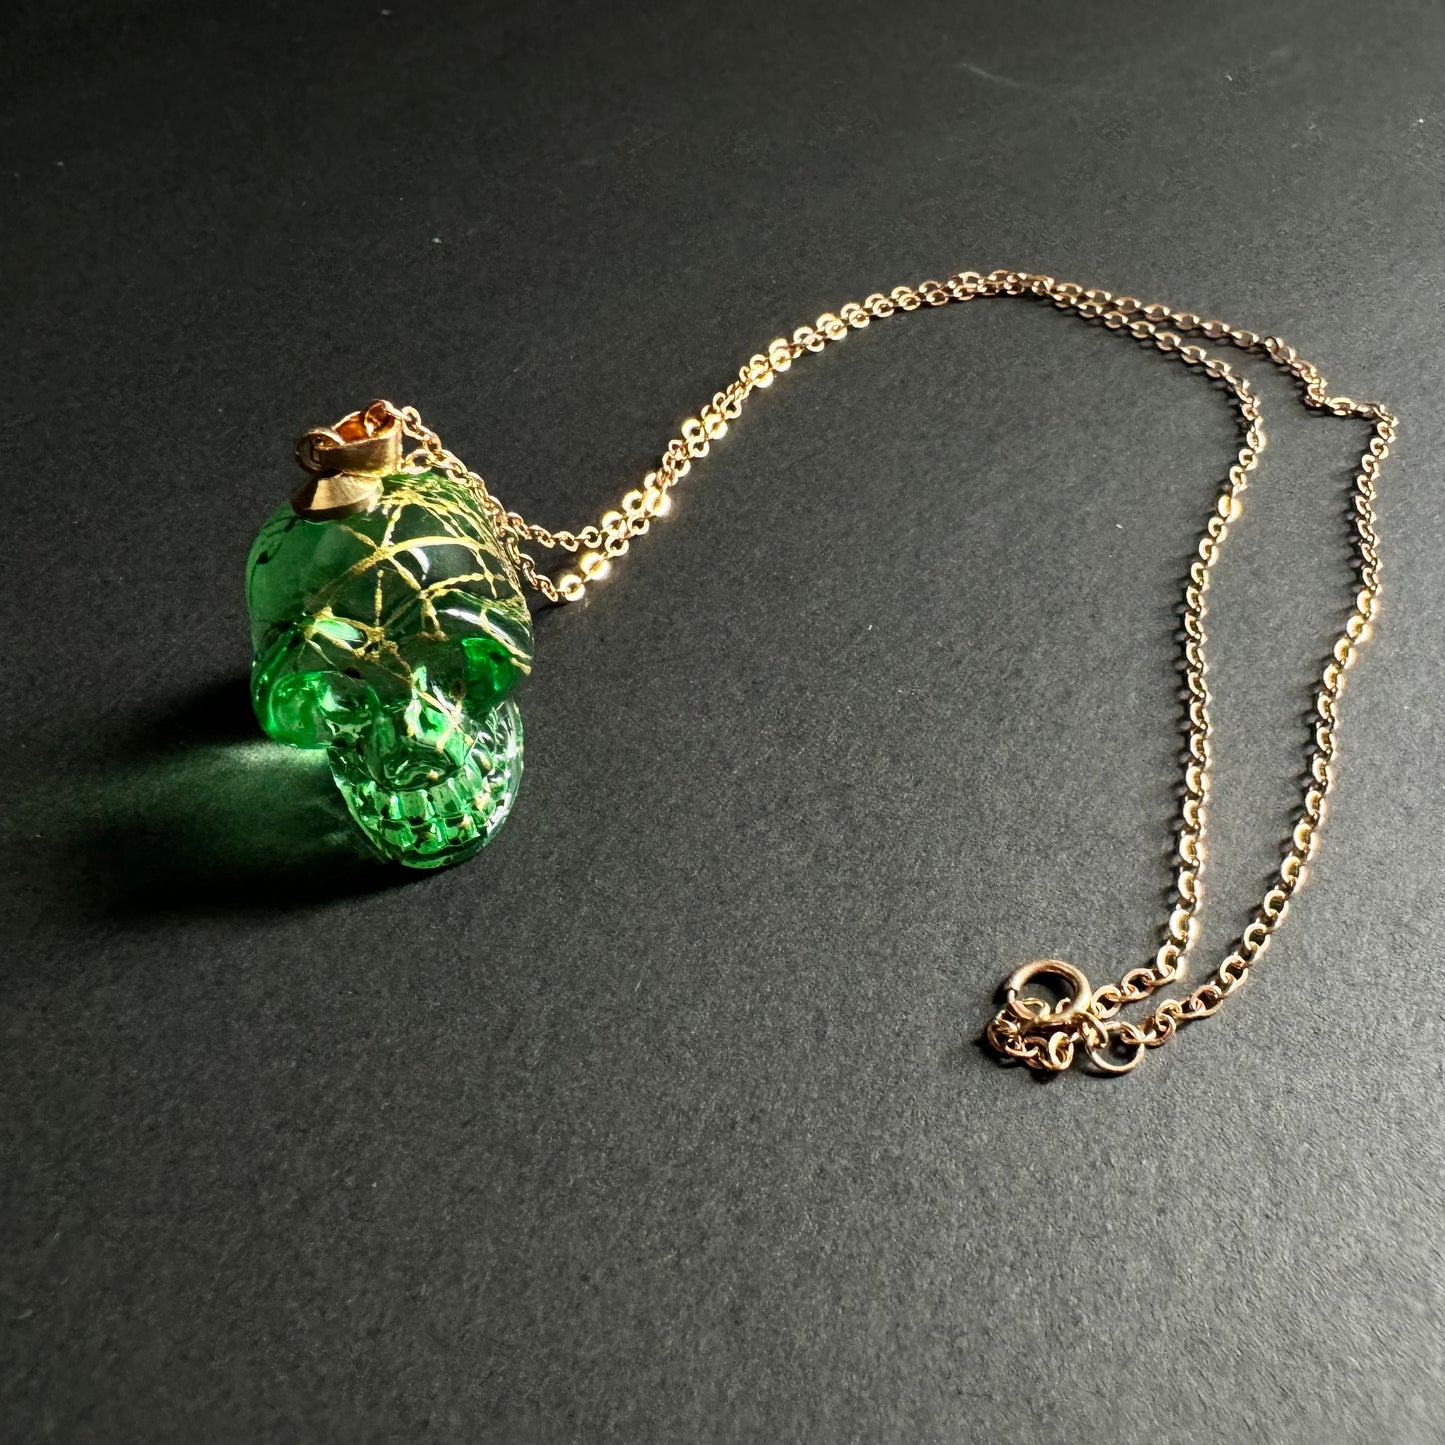 Green Glass Skull Necklace